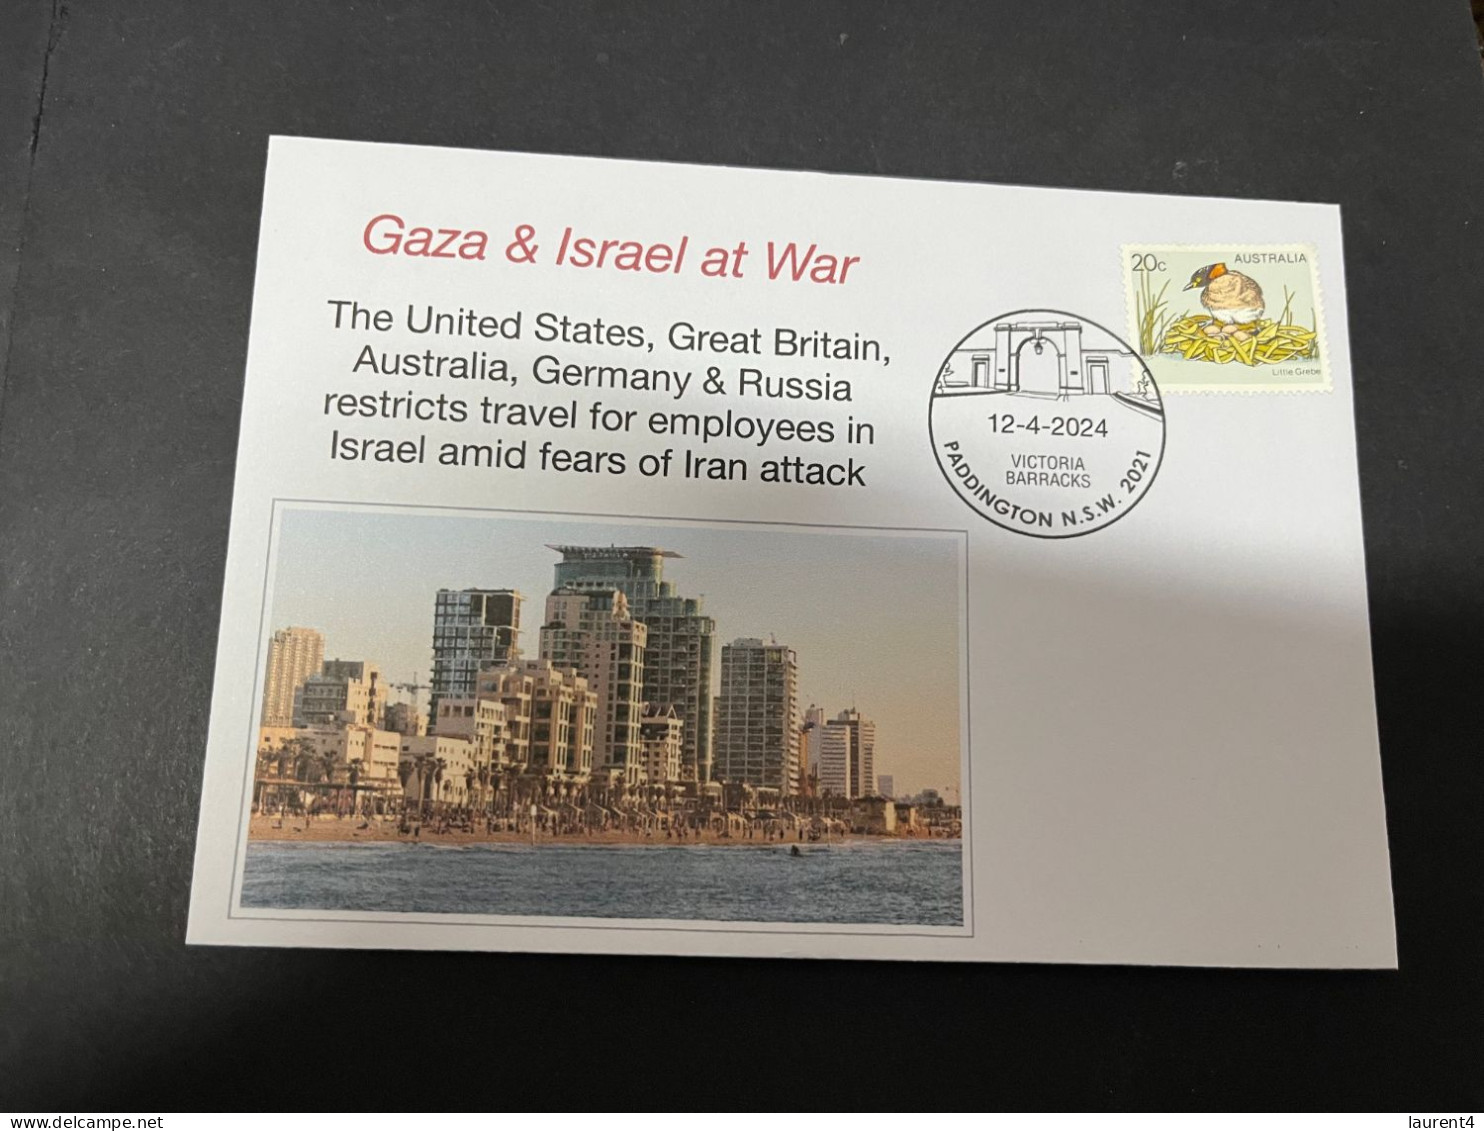 13-4-2024 (1 Z ) War In Gaza - US - UK - Australia - Germany & Russia Restricts Travel For Employees In Israel - Militaria